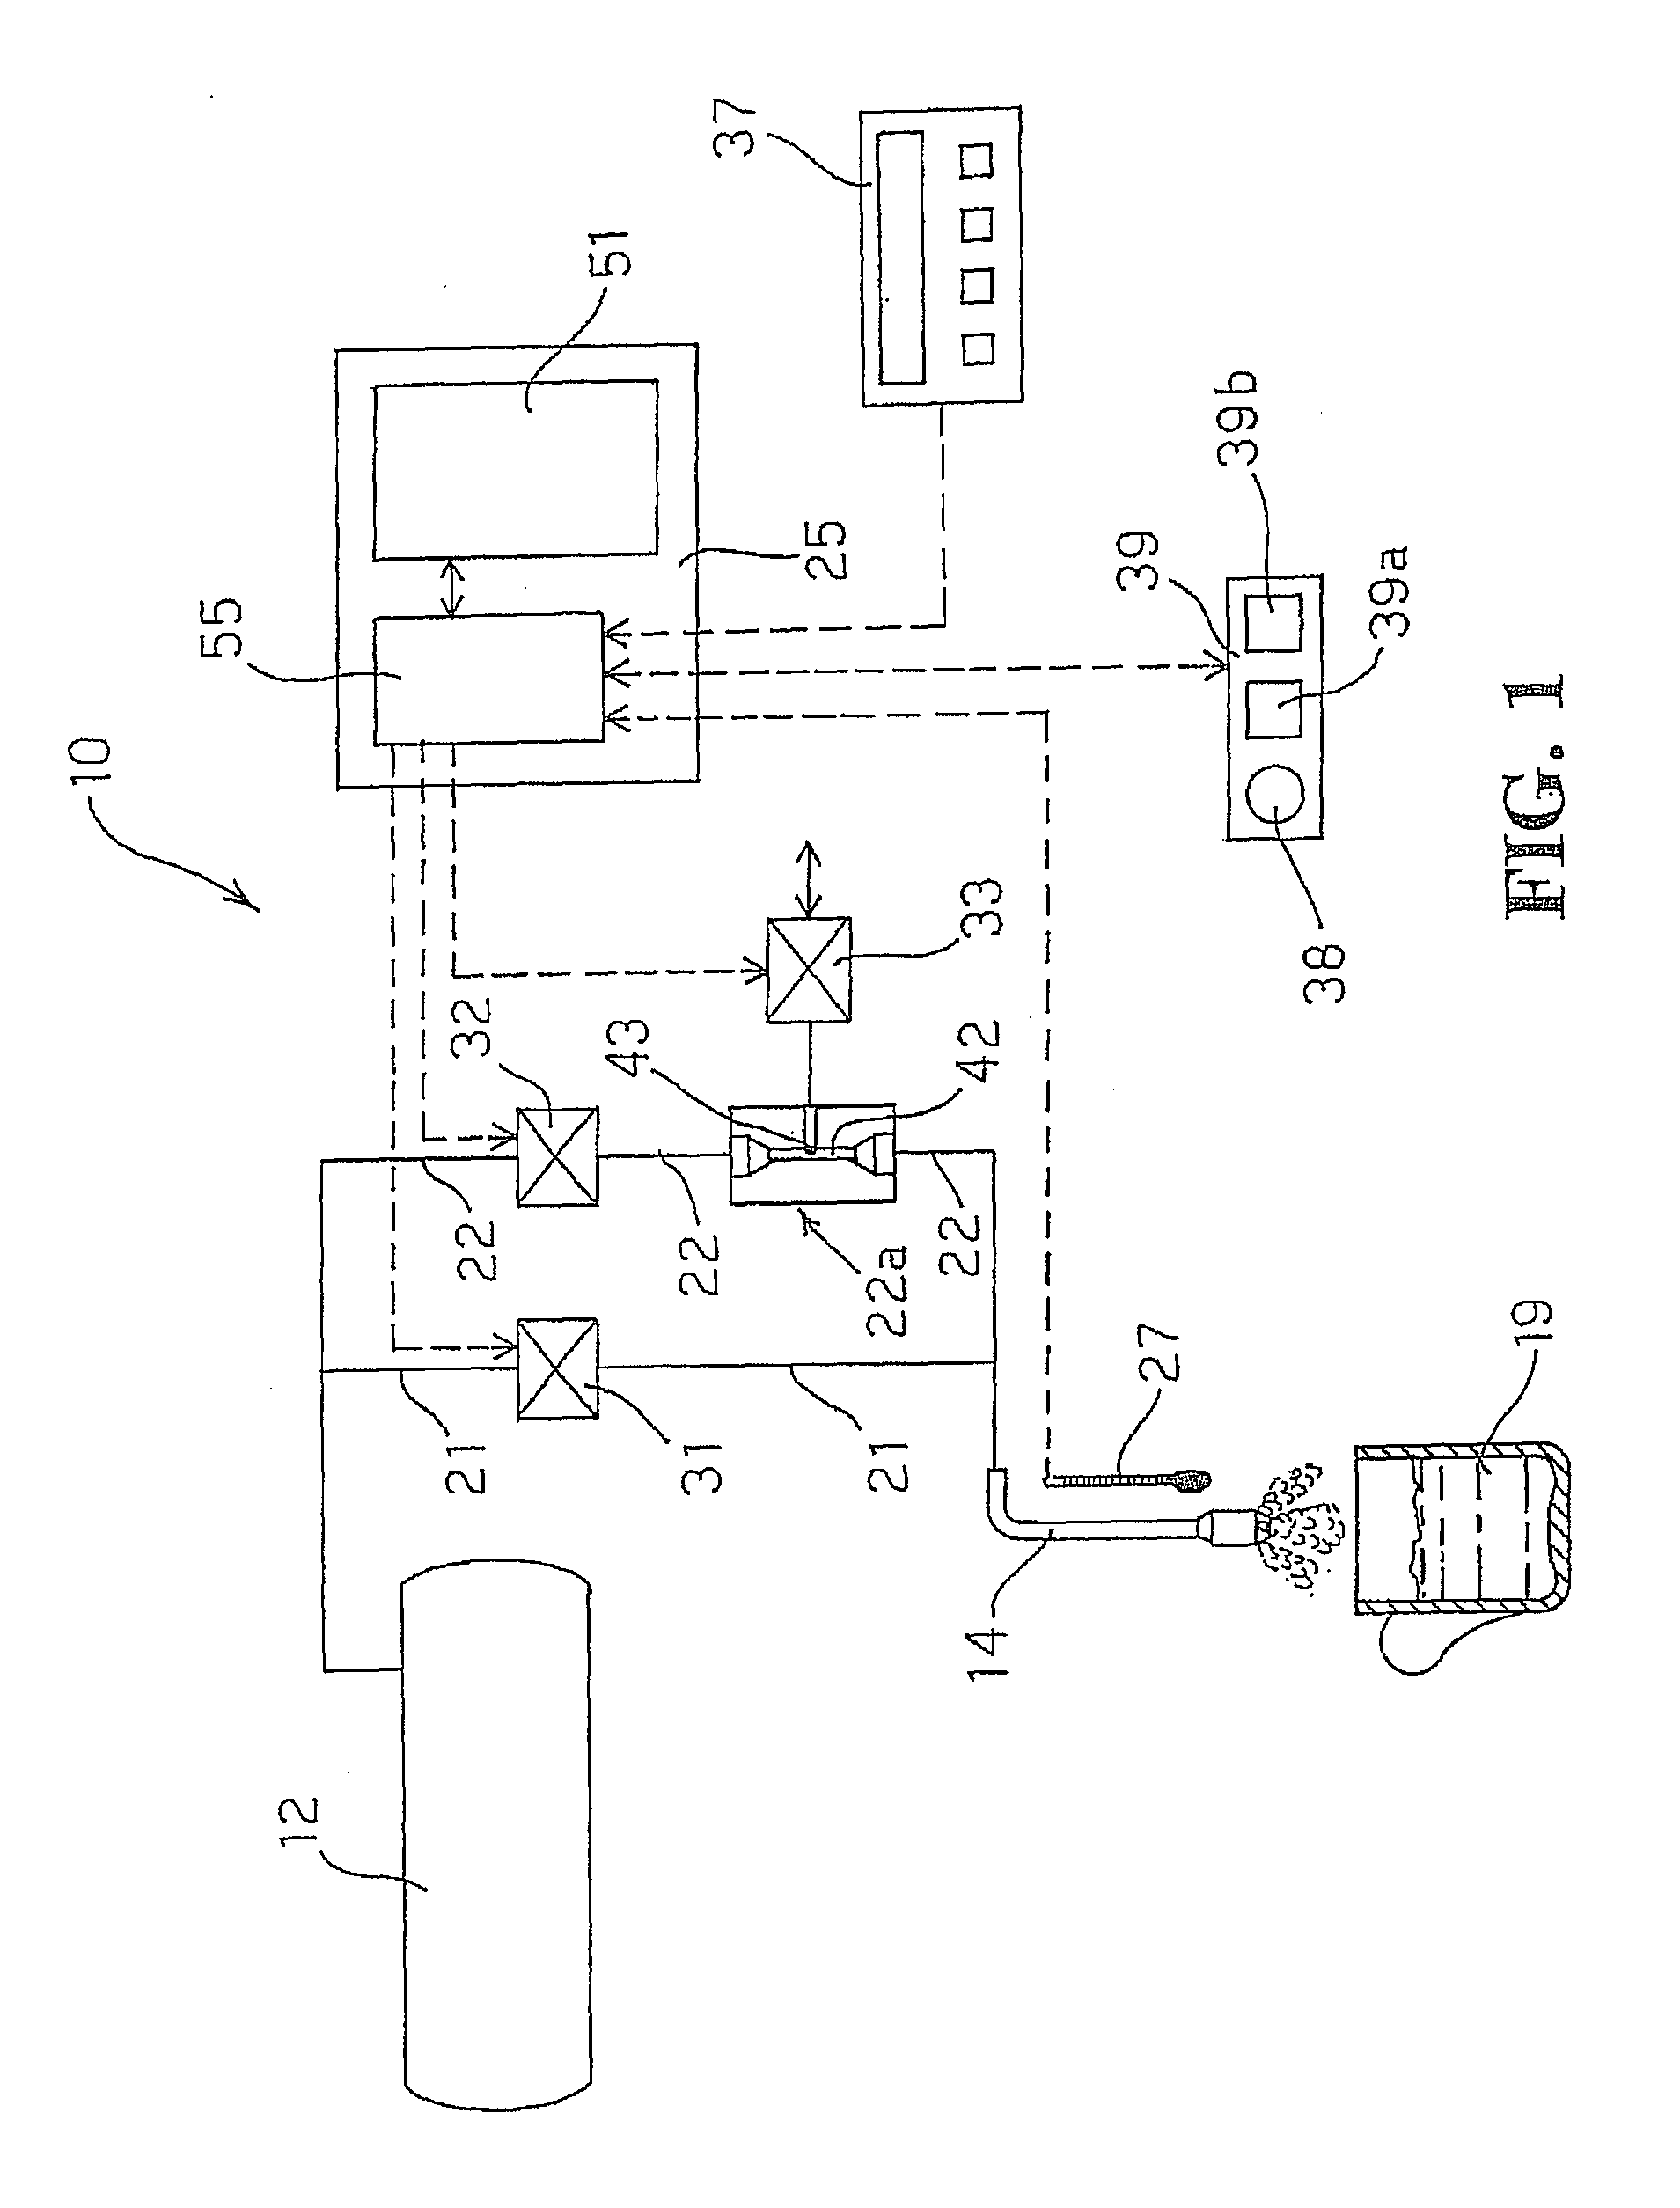 Device for heating and/or frothing a beverage